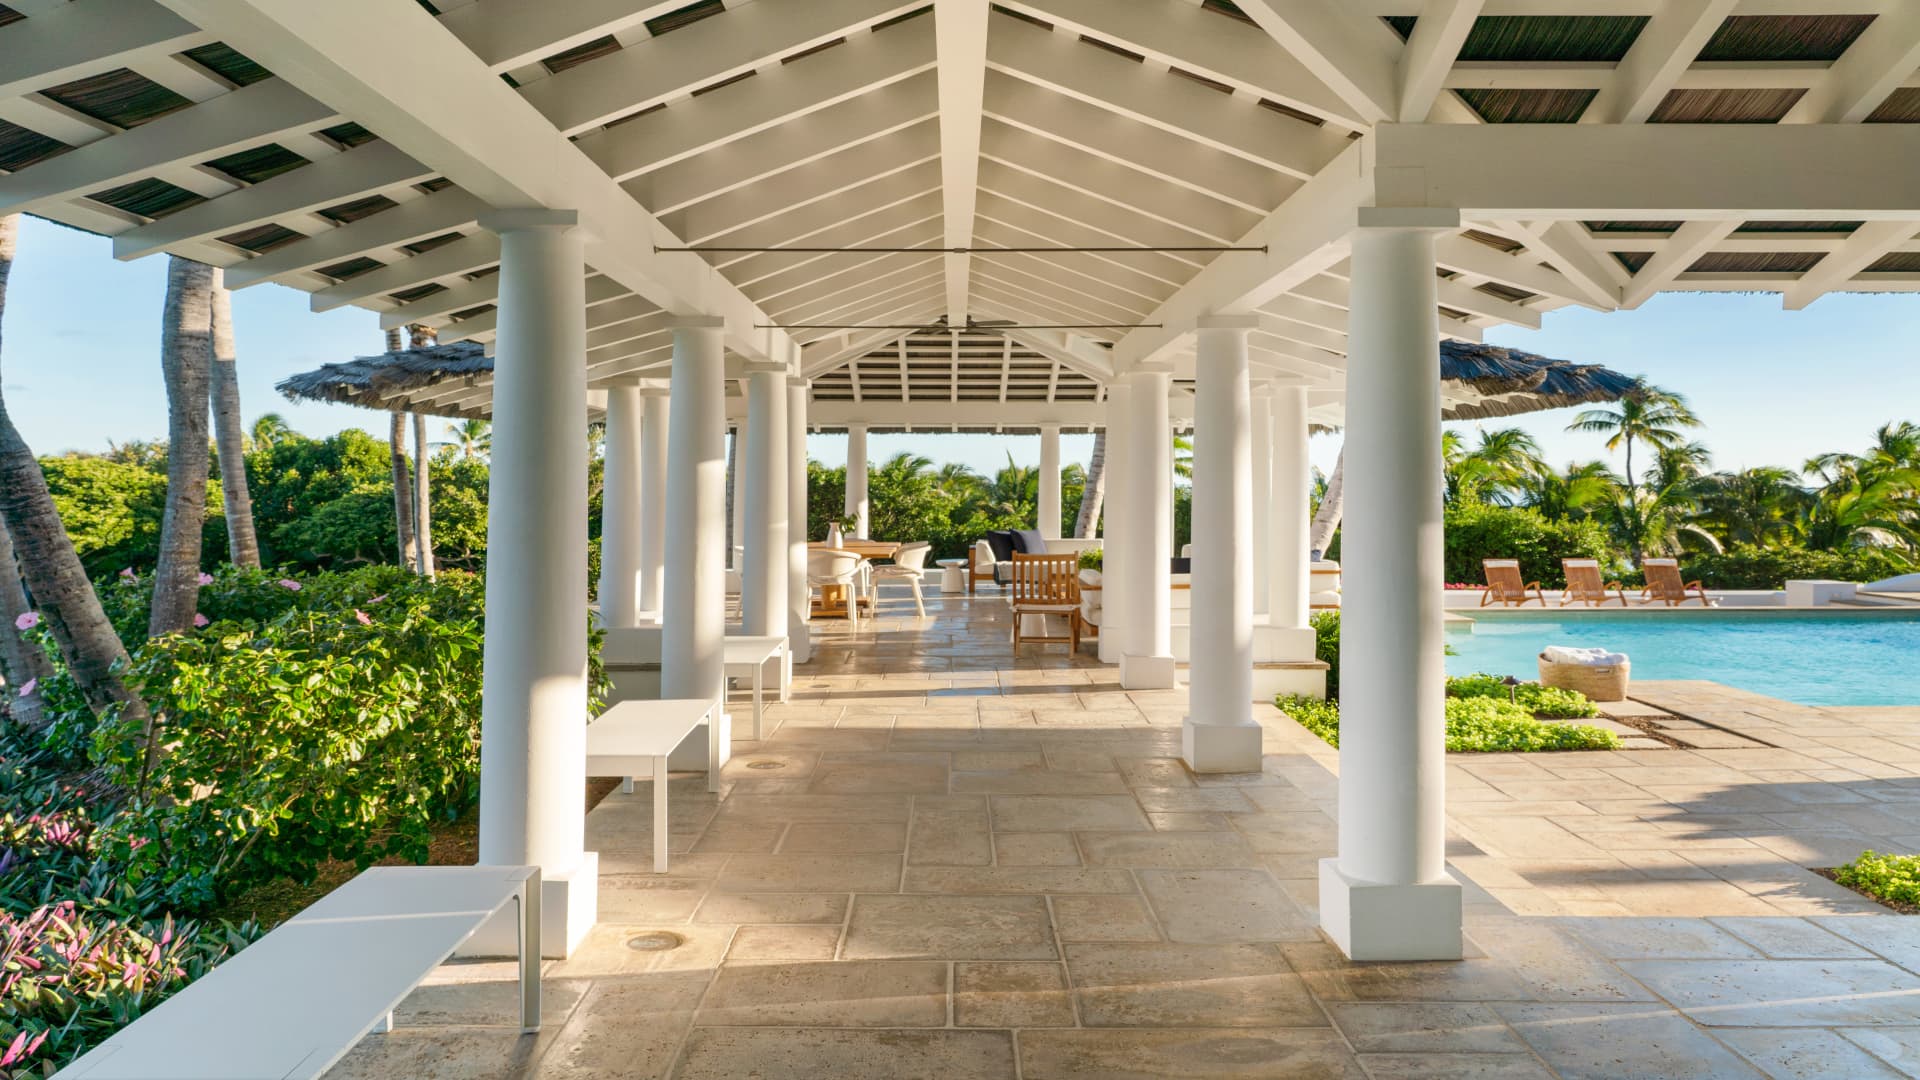 The breezeway leading from the main house to a dining area adjacent to the pool.